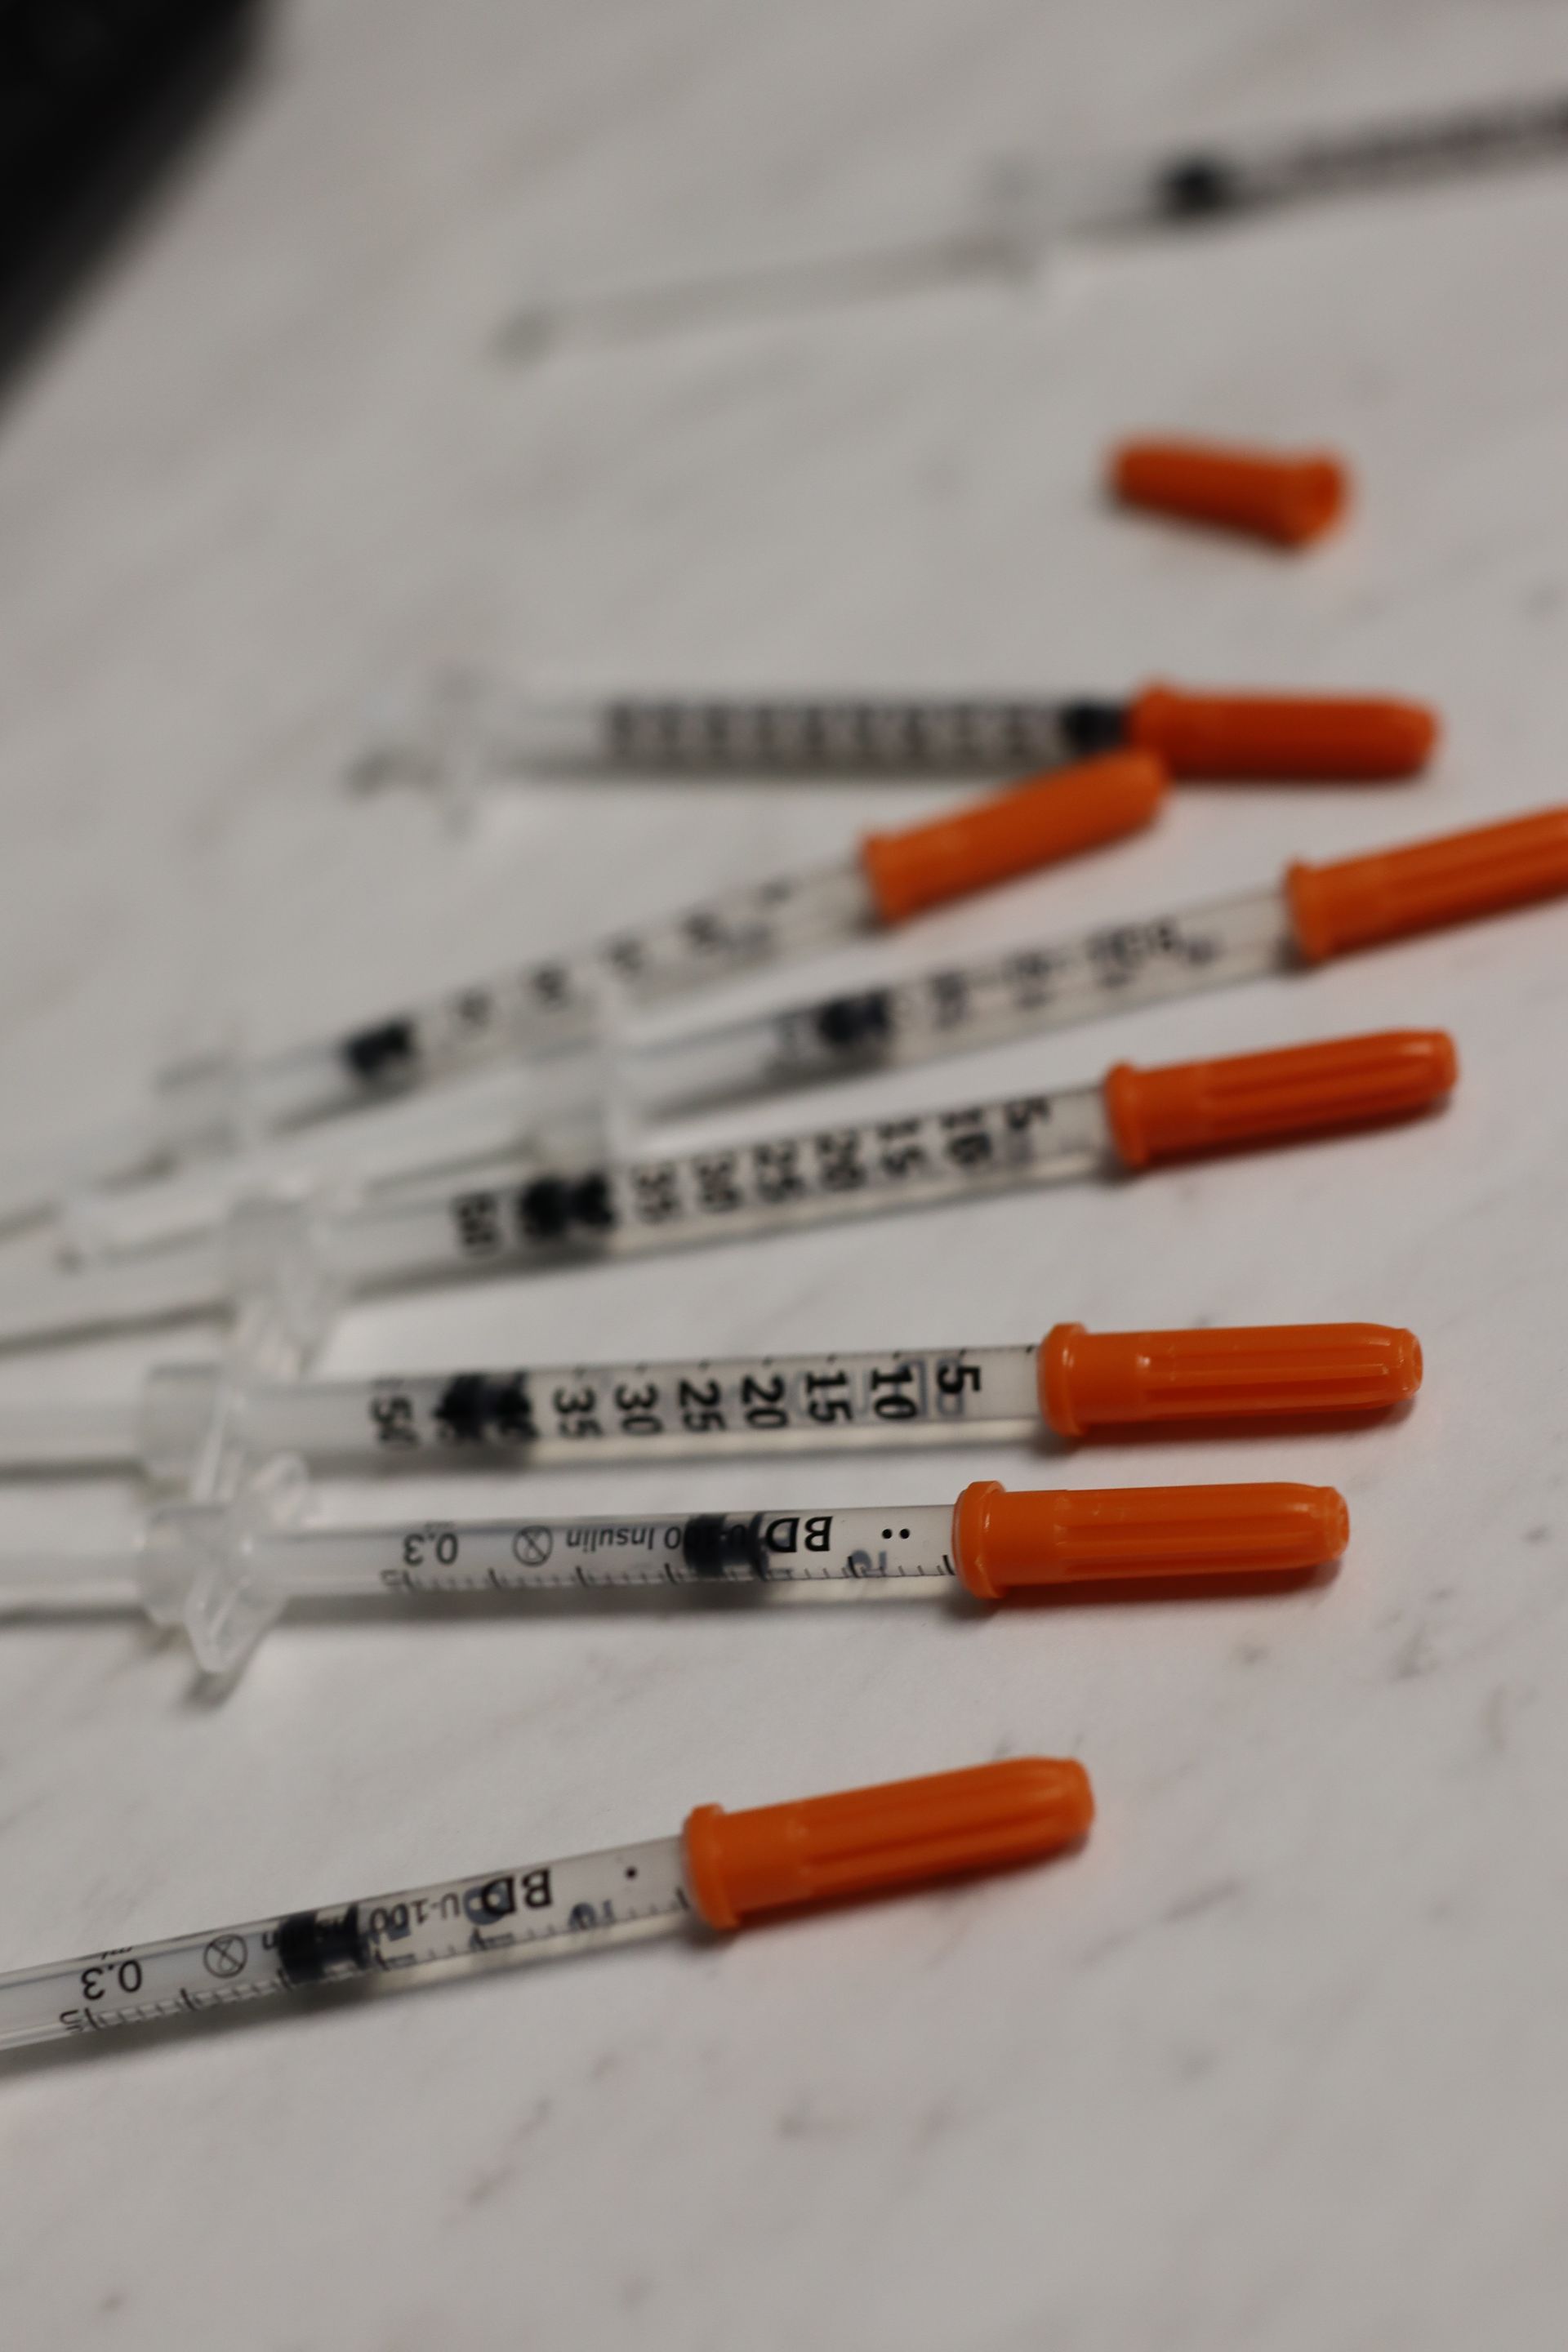 Syringes filled with Botox and Dysport, ready for expert aesthetic treatments at Windermere Medical